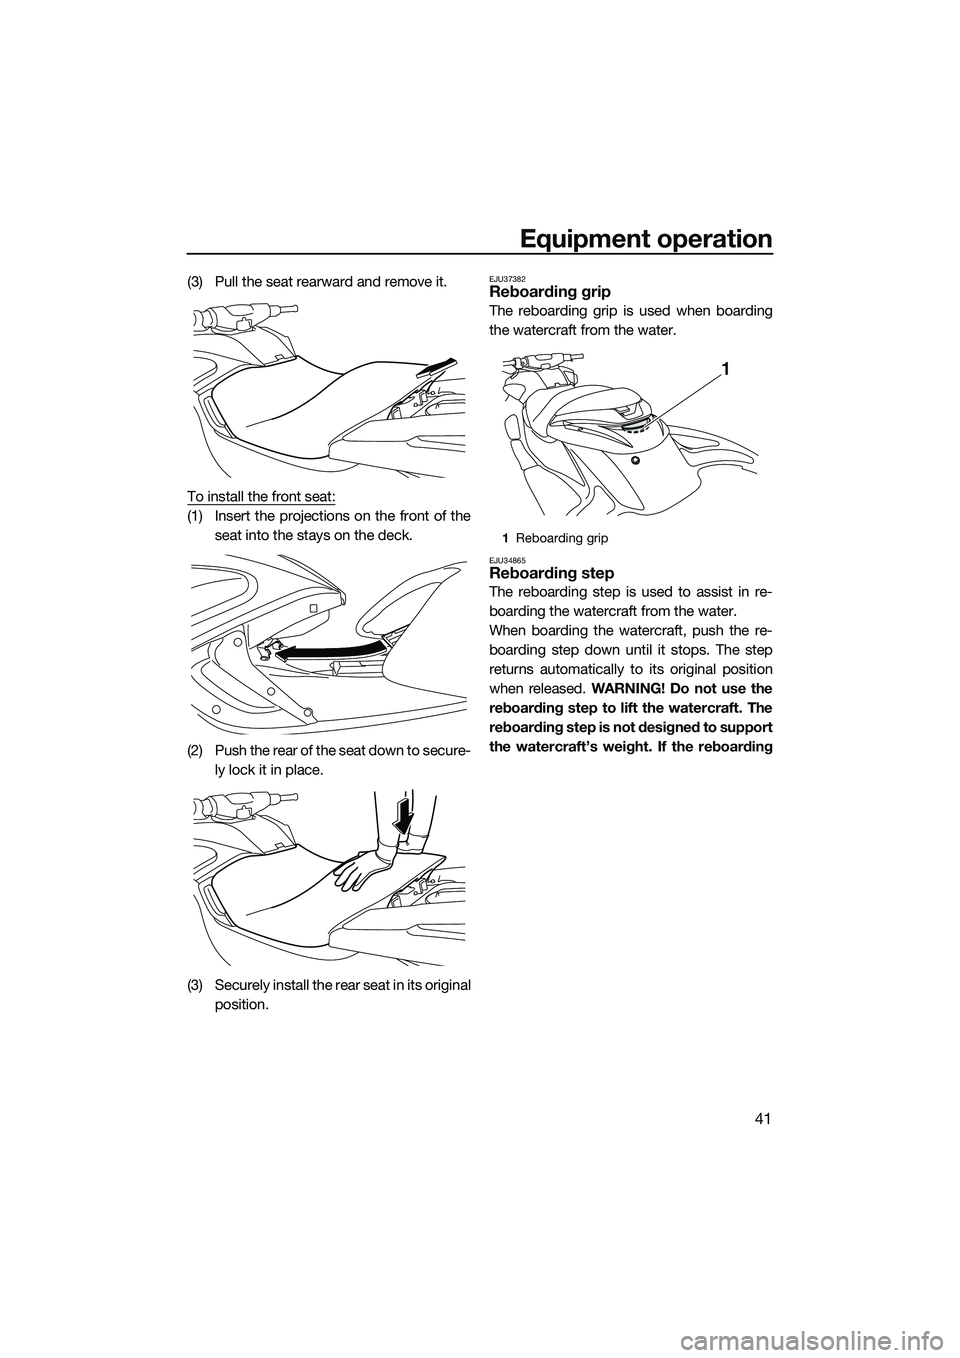 YAMAHA FZR SVHO 2014  Owners Manual Equipment operation
41
(3) Pull the seat rearward and remove it.
To install the front seat:
(1) Insert the projections on the front of theseat into the stays on the deck.
(2) Push the rear of the seat